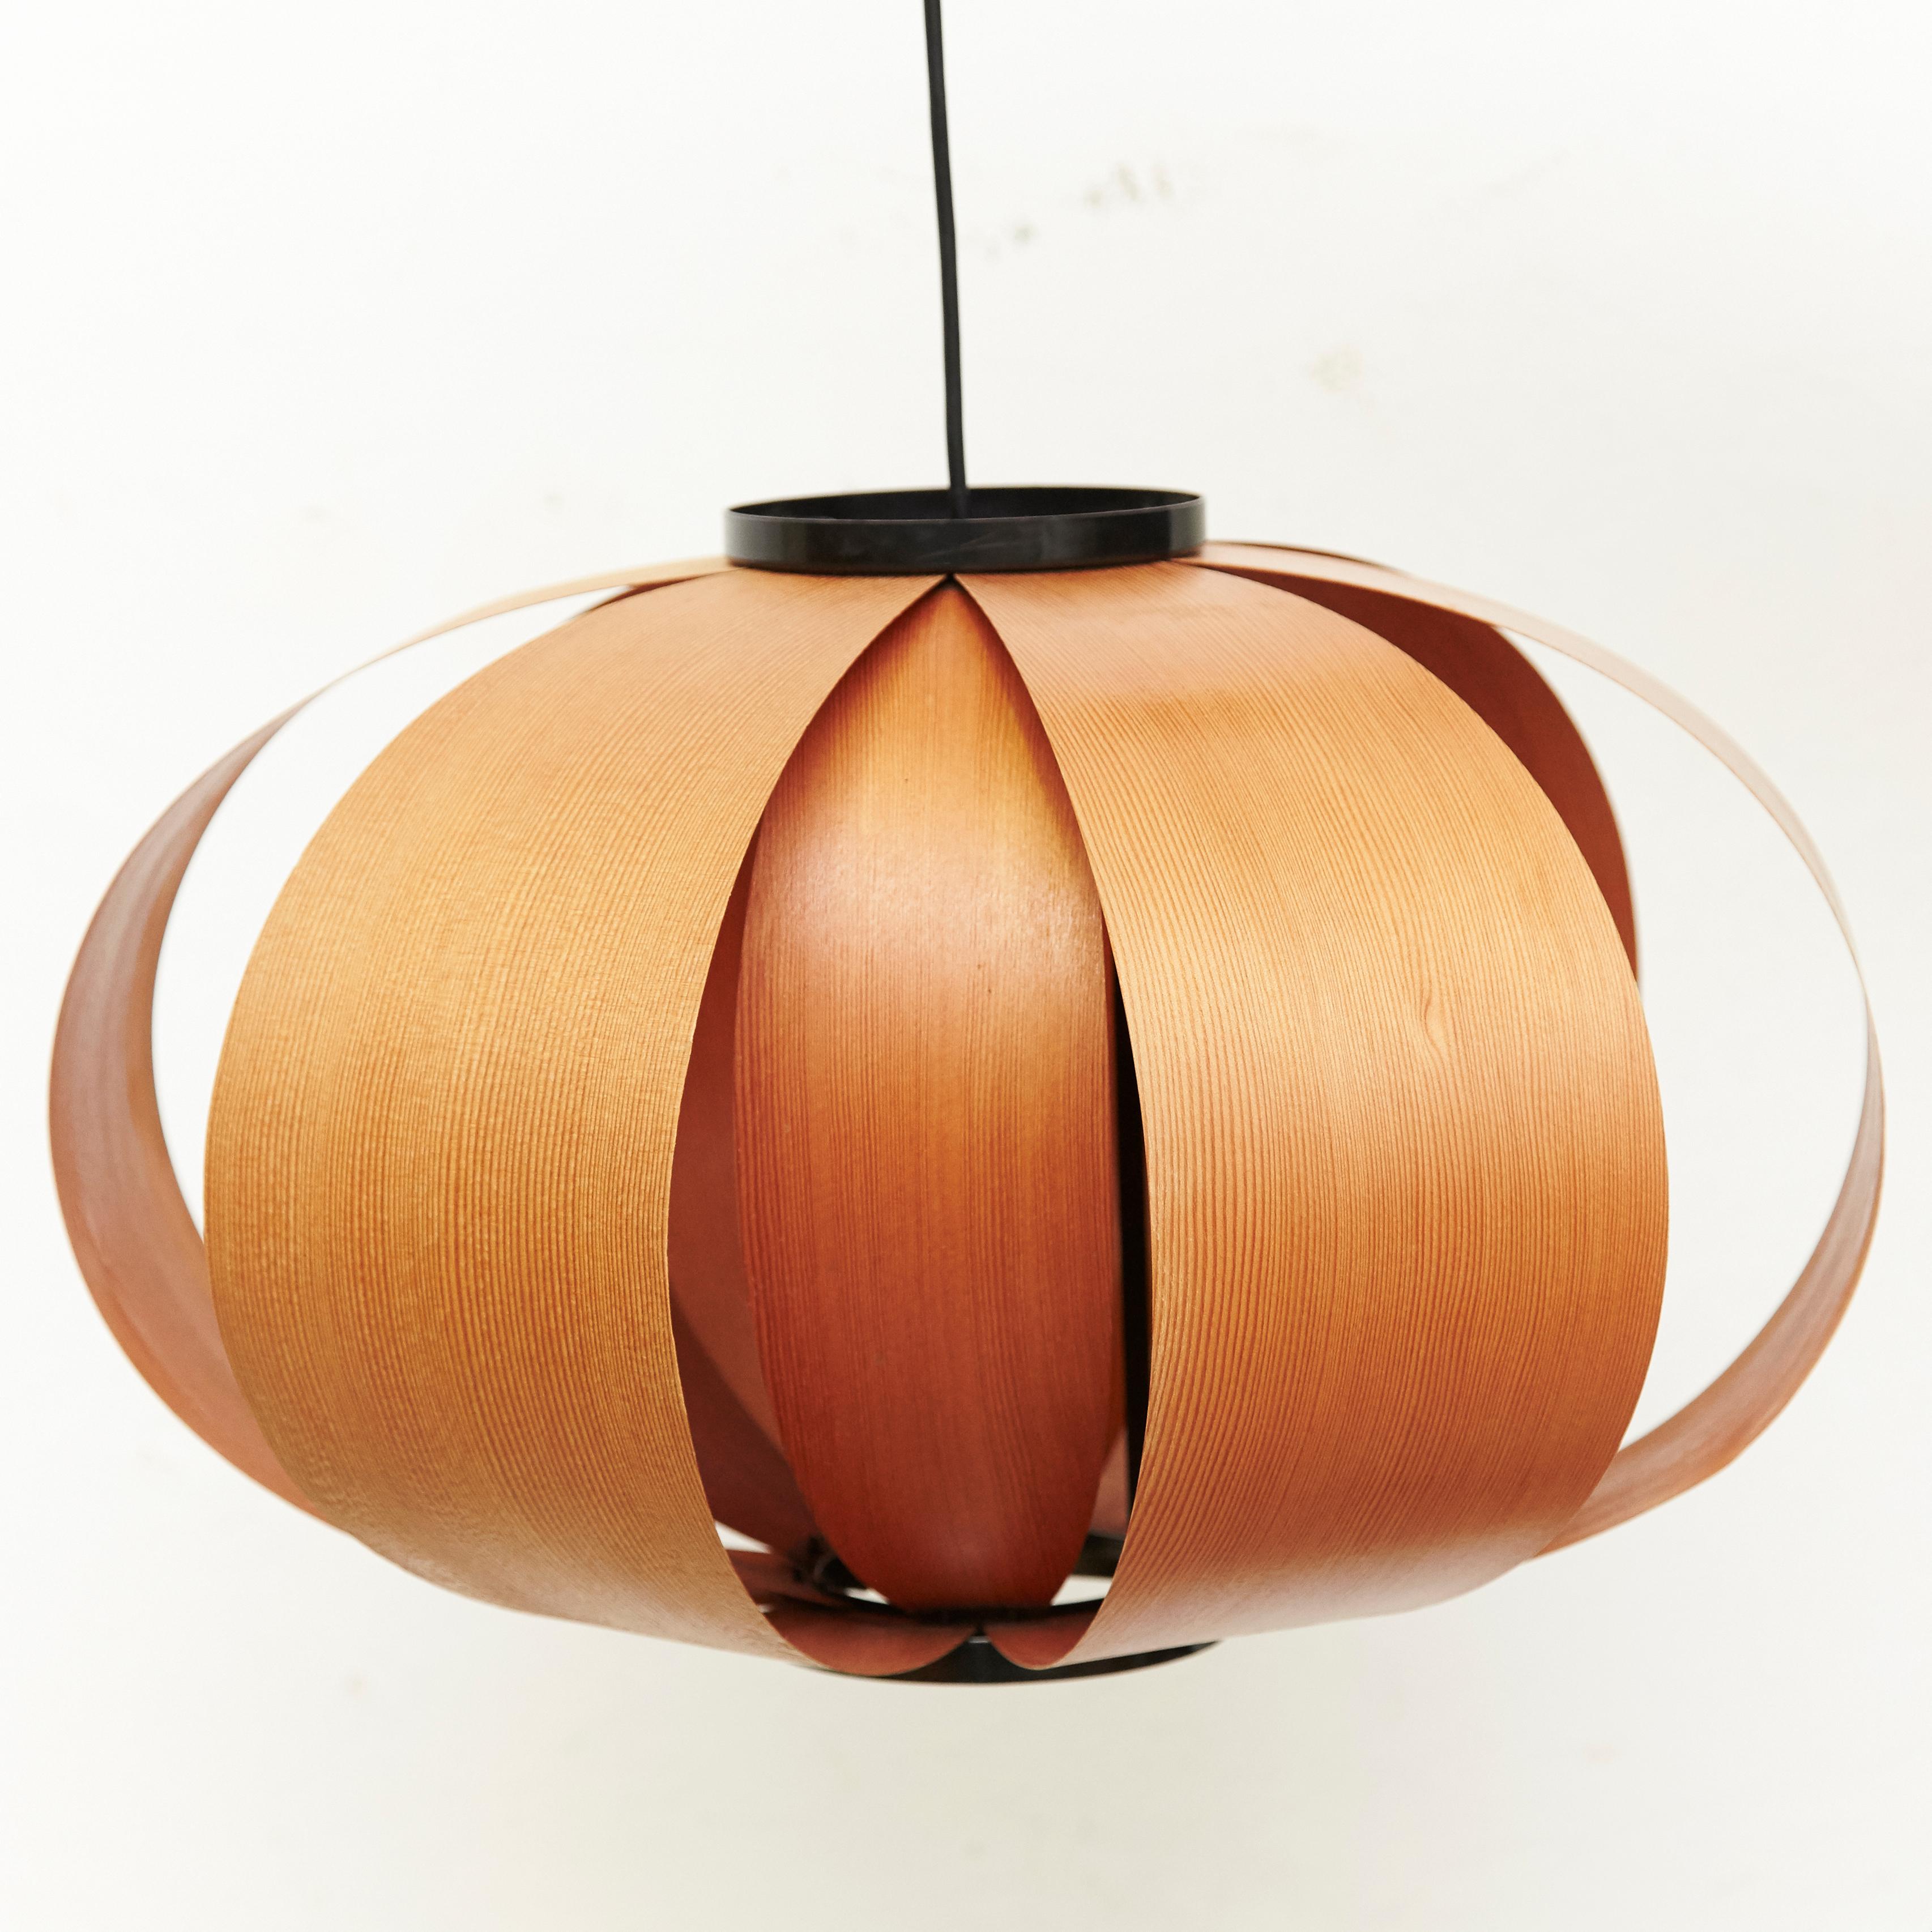 Disa lamp or coderch lamp, designed by Jose Antonio Coderch in 1957, manufactured in Spain, circa 1950.
It's composed by two sheets of bentwood in two different layers size.
Aluminium structure and bentwood as lampshade.

The intention is to